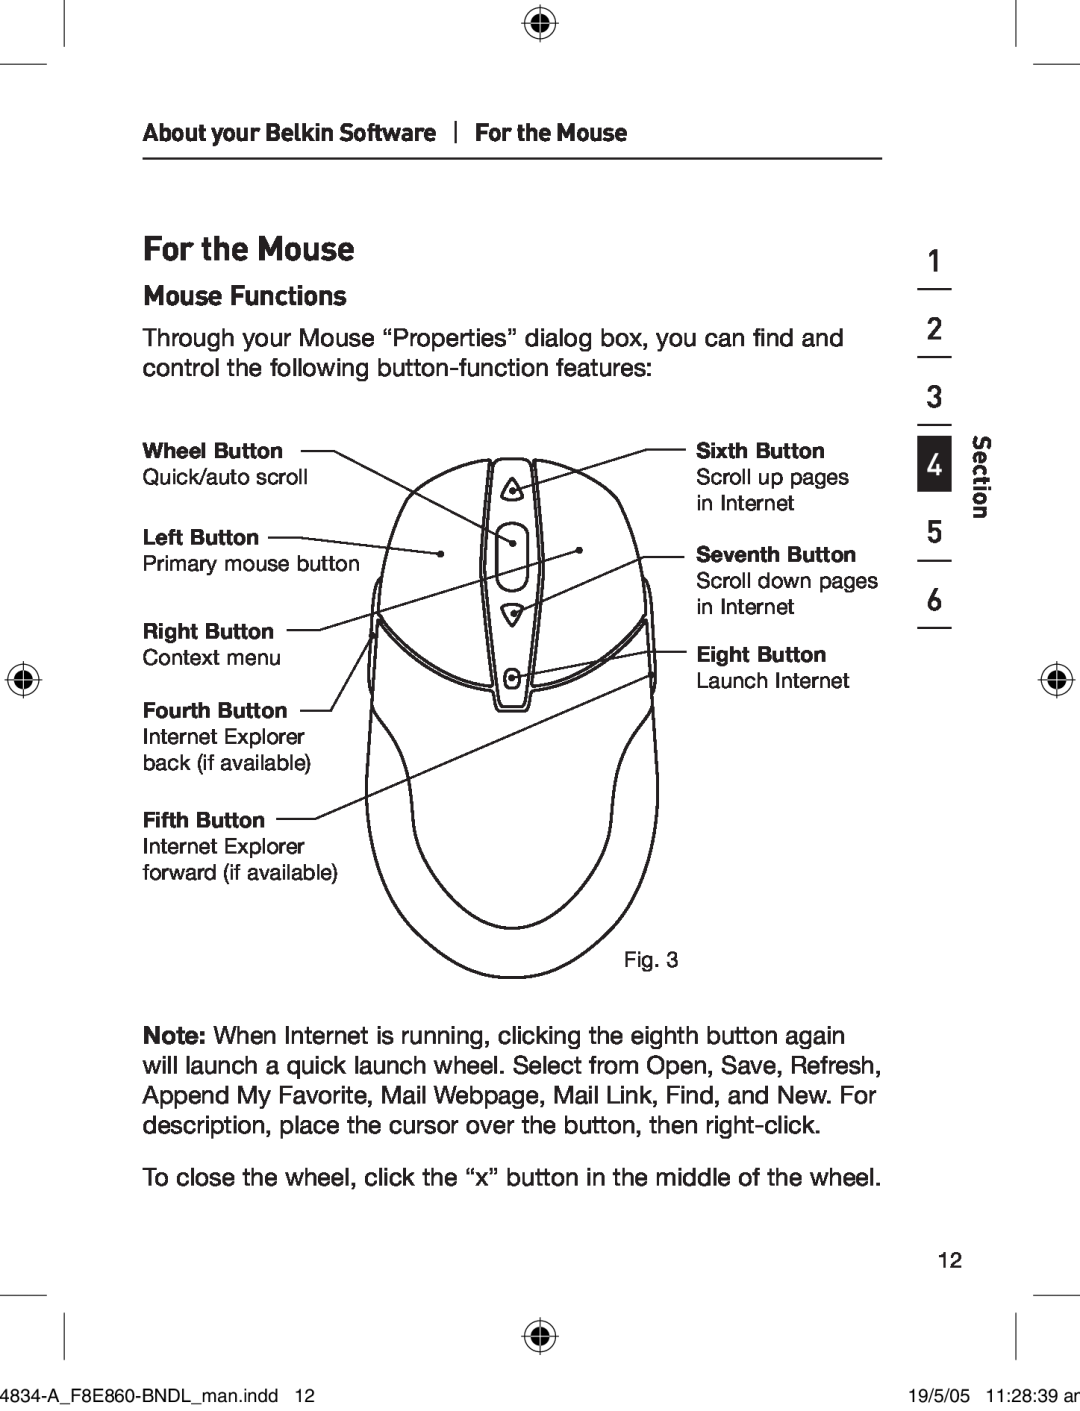 Belkin F8E860-BNDL manual Mouse Functions, About your Belkin Software For the Mouse, Section 